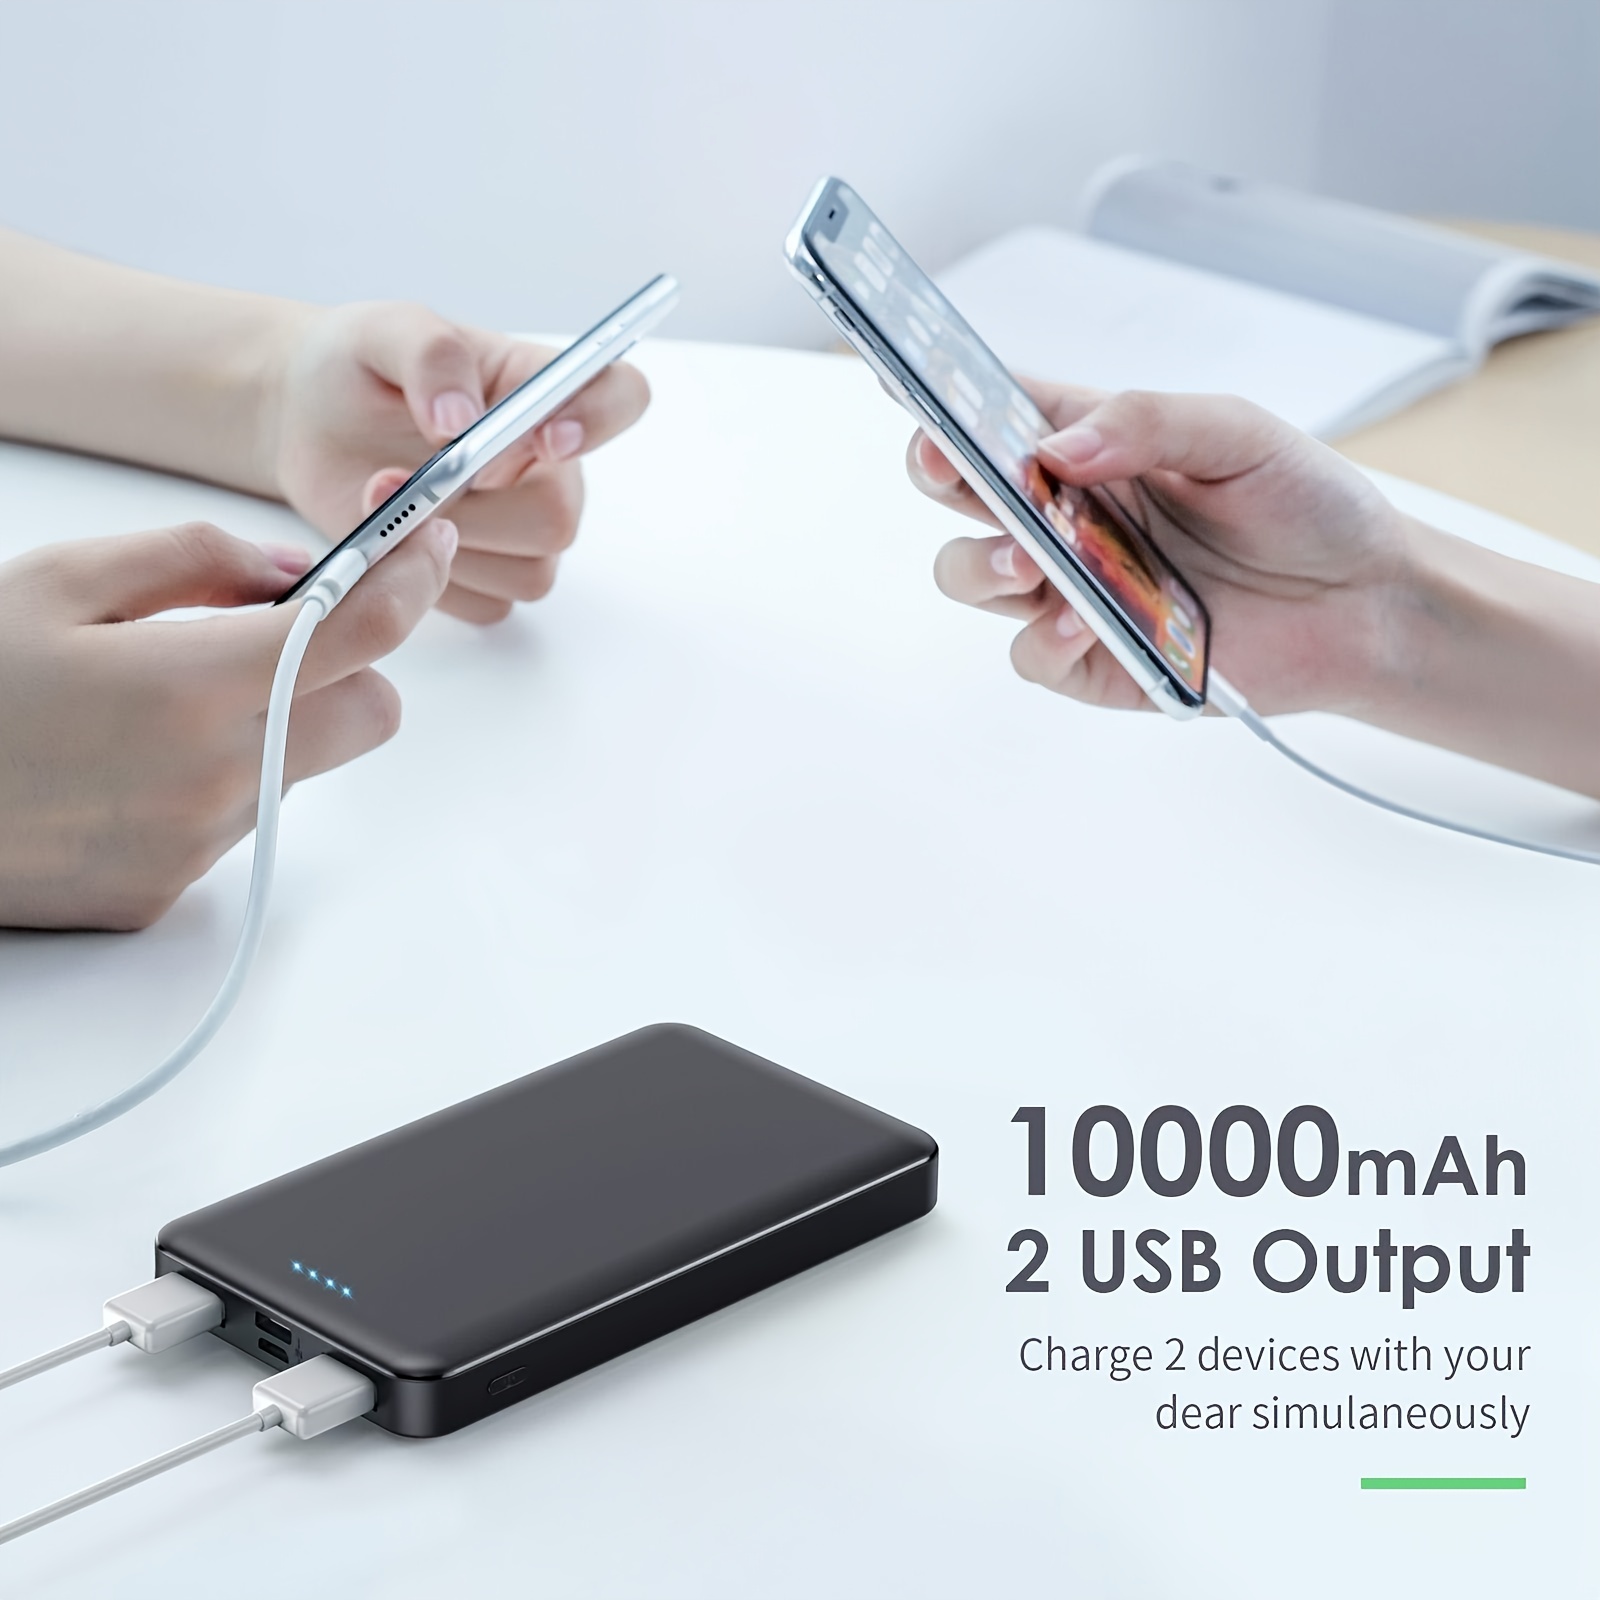 portable charger power bank 10000mah ultra slim design portable phone charger with type c input 2 output backup charging external battery pack for smart phone android phone tablet etc compatible with iphone 15 14 13 12 11 x 8 7 6 samsung s20 details 1